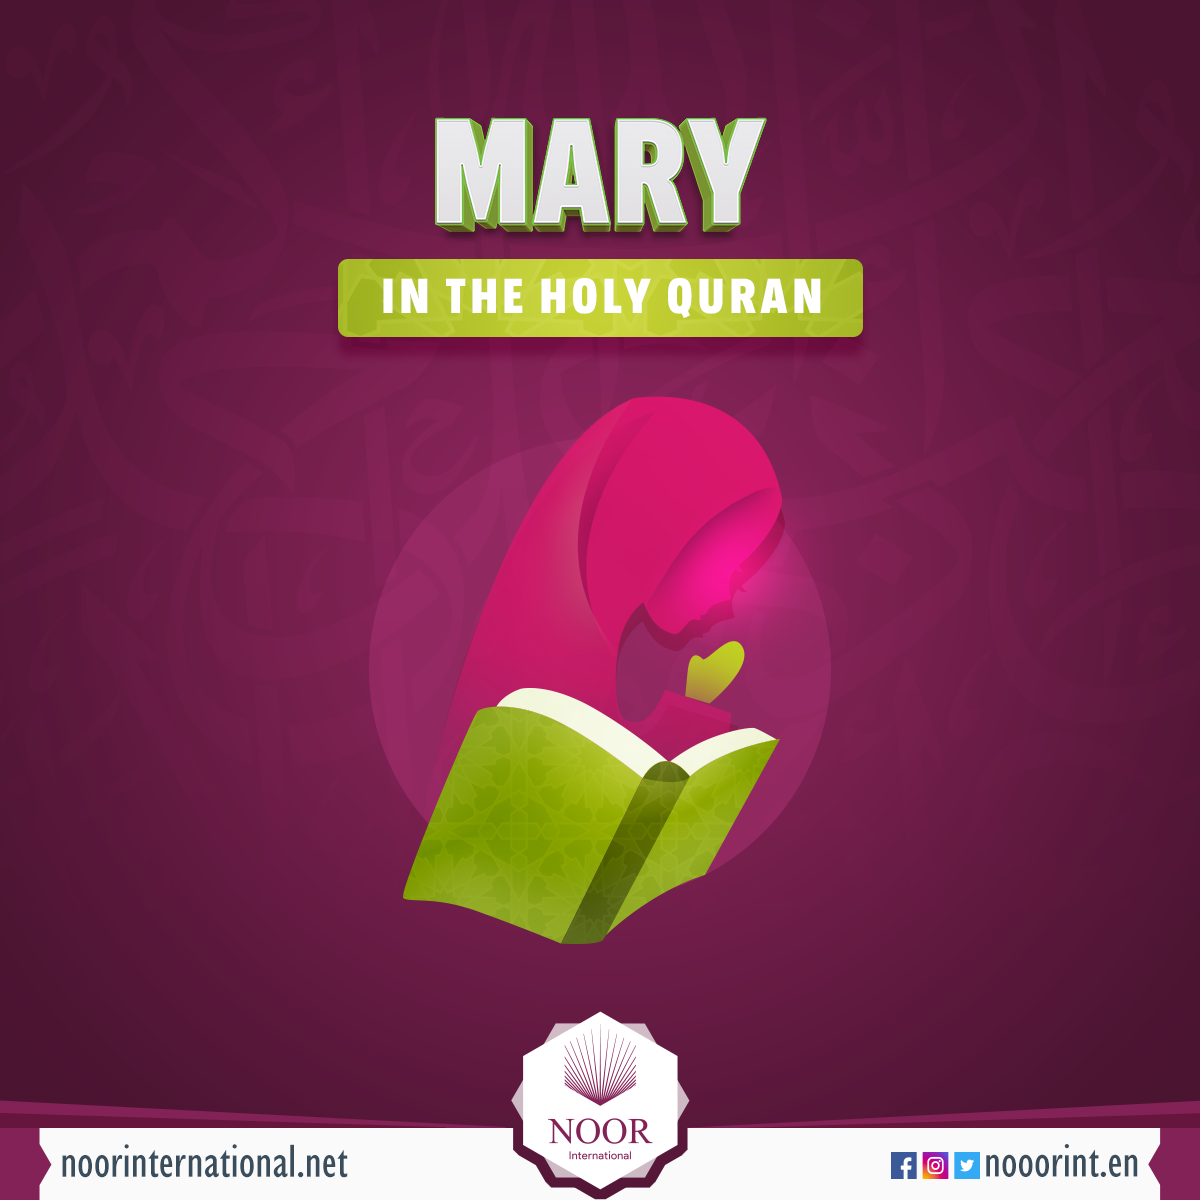 Mary in the Holy Quran